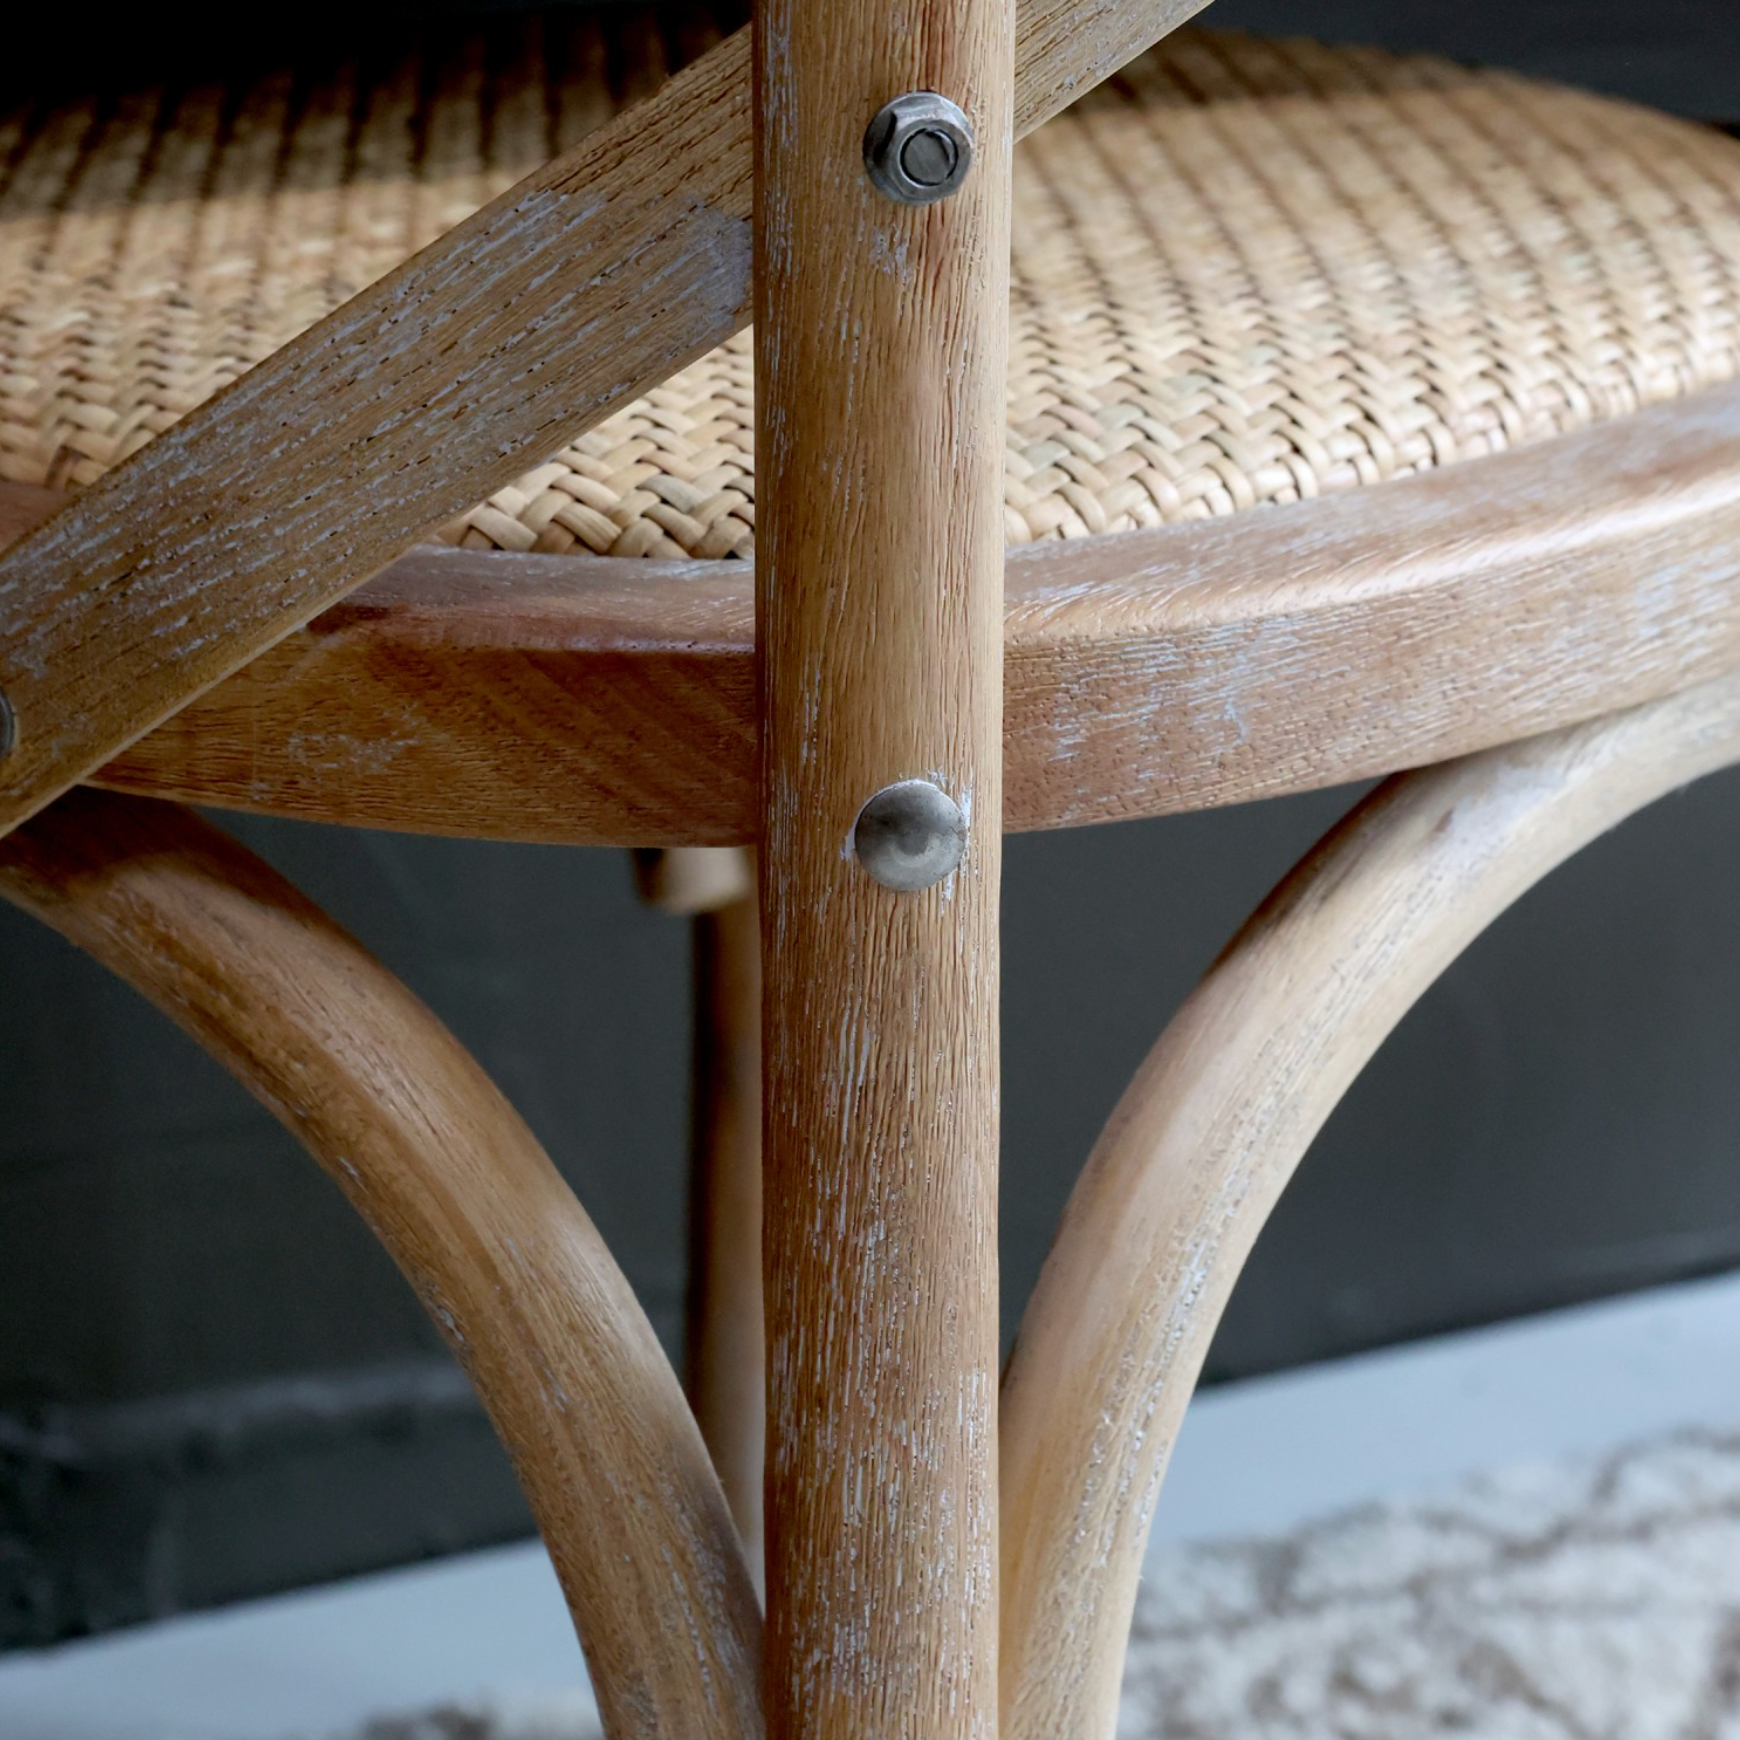 A close up image of a dining chair with wicker seat.